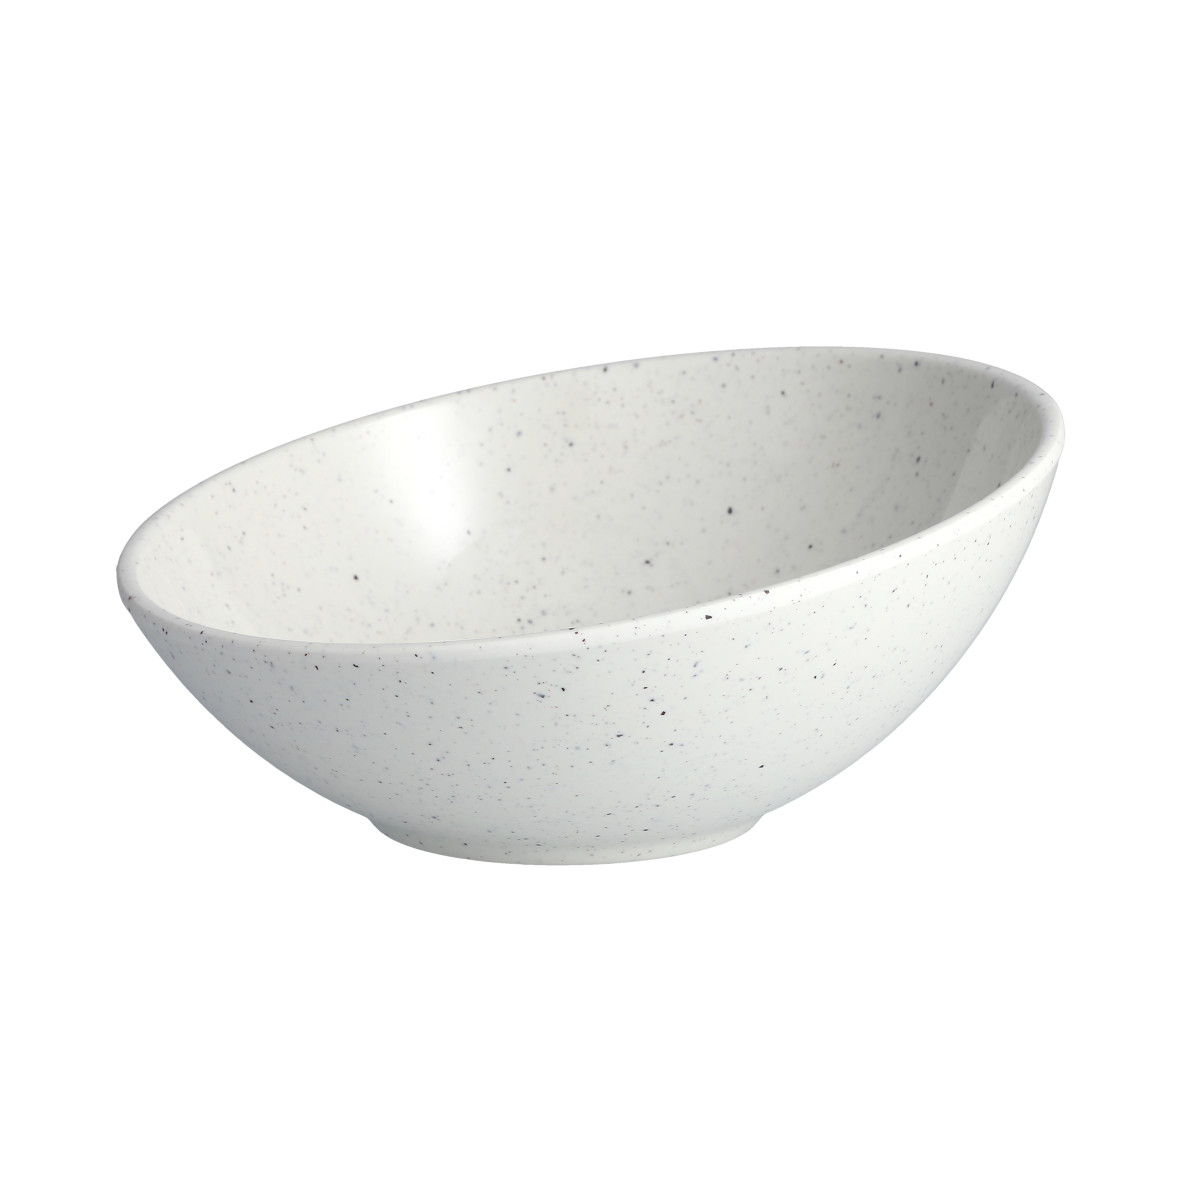 Camp Outdoor Individual Bowl, White, Set of 6